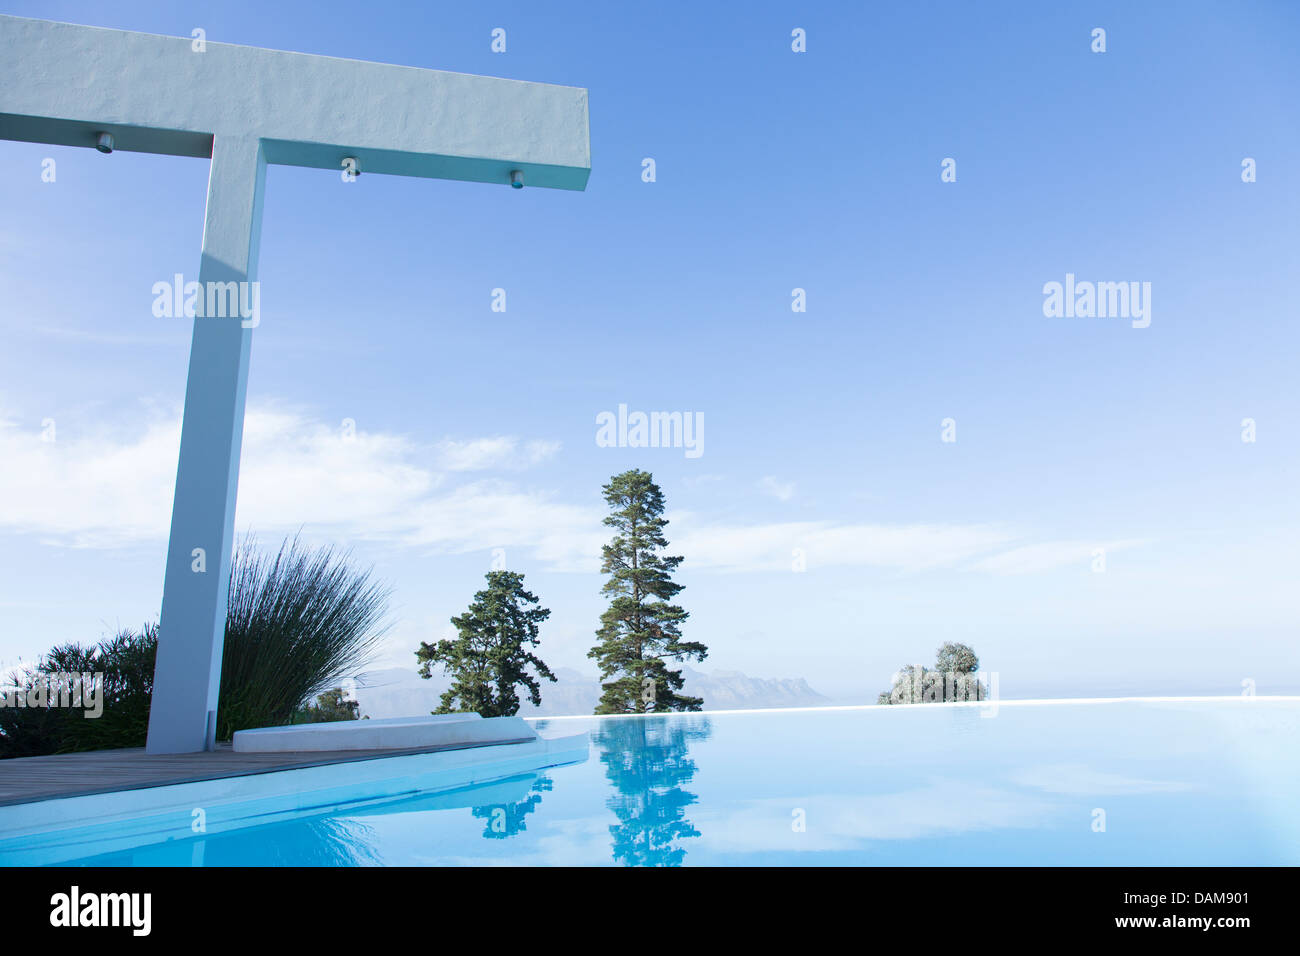 Trees and shower overlooking infinity pool Stock Photo